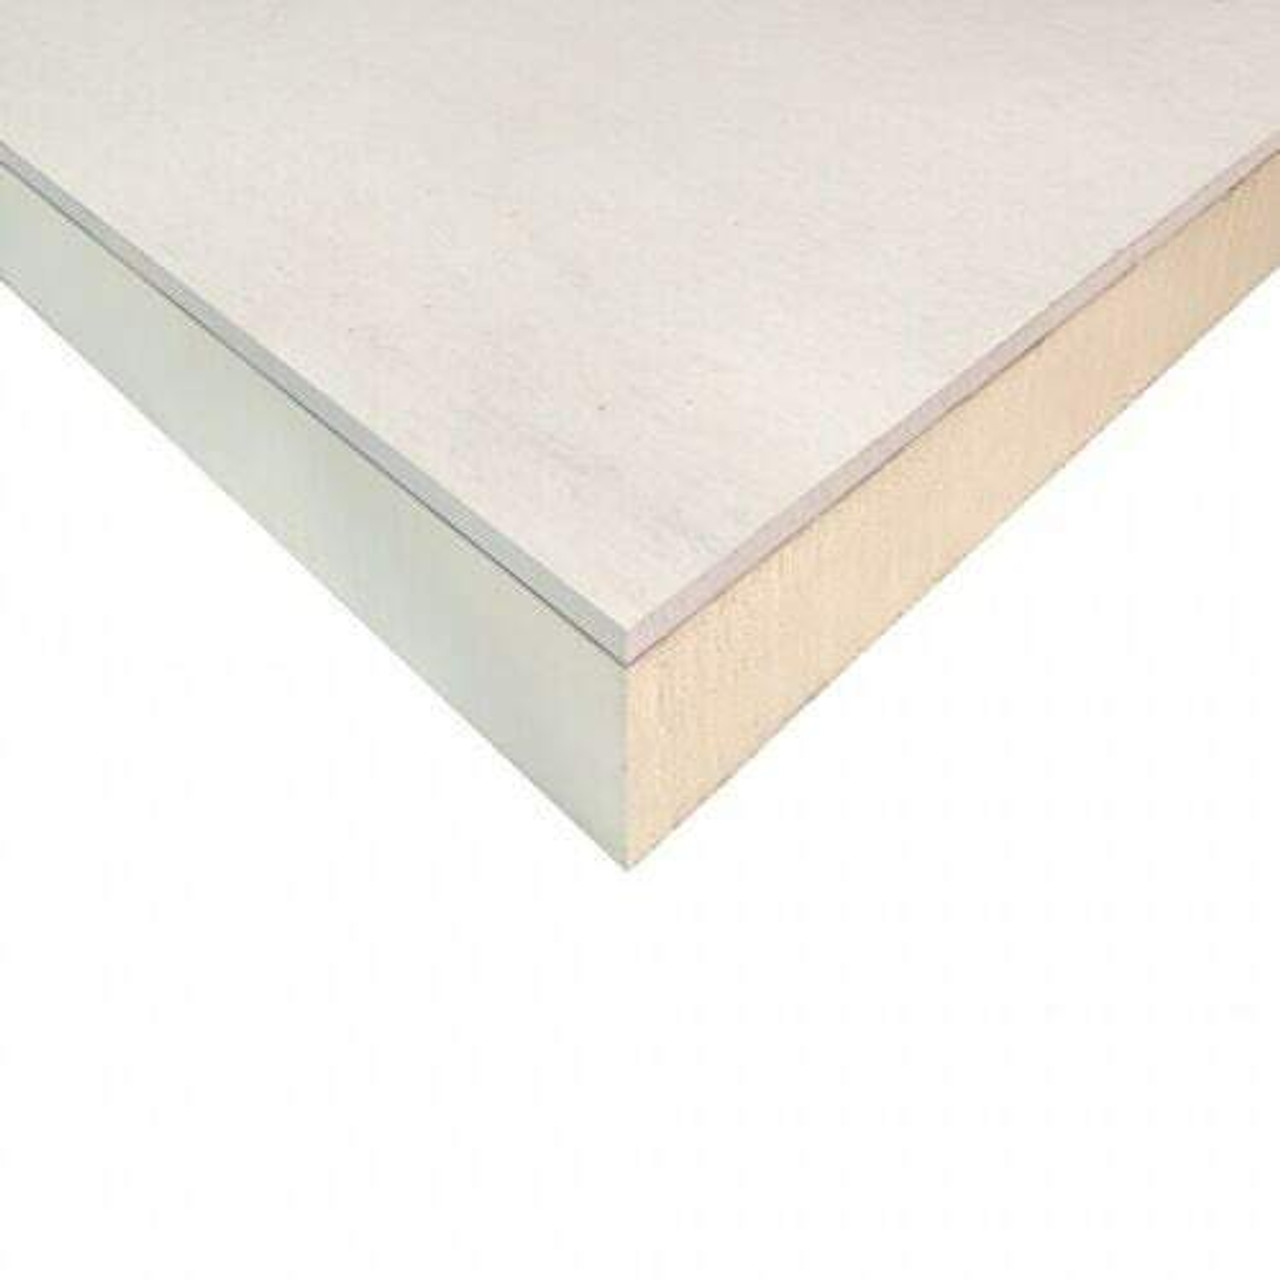 37.5mm- EcoTherm Eco-Liner Rigid PIR Dry Lining Insulation Board - 2400mm x 1200mm x 37.5mm 100000012386-S ECO-50382